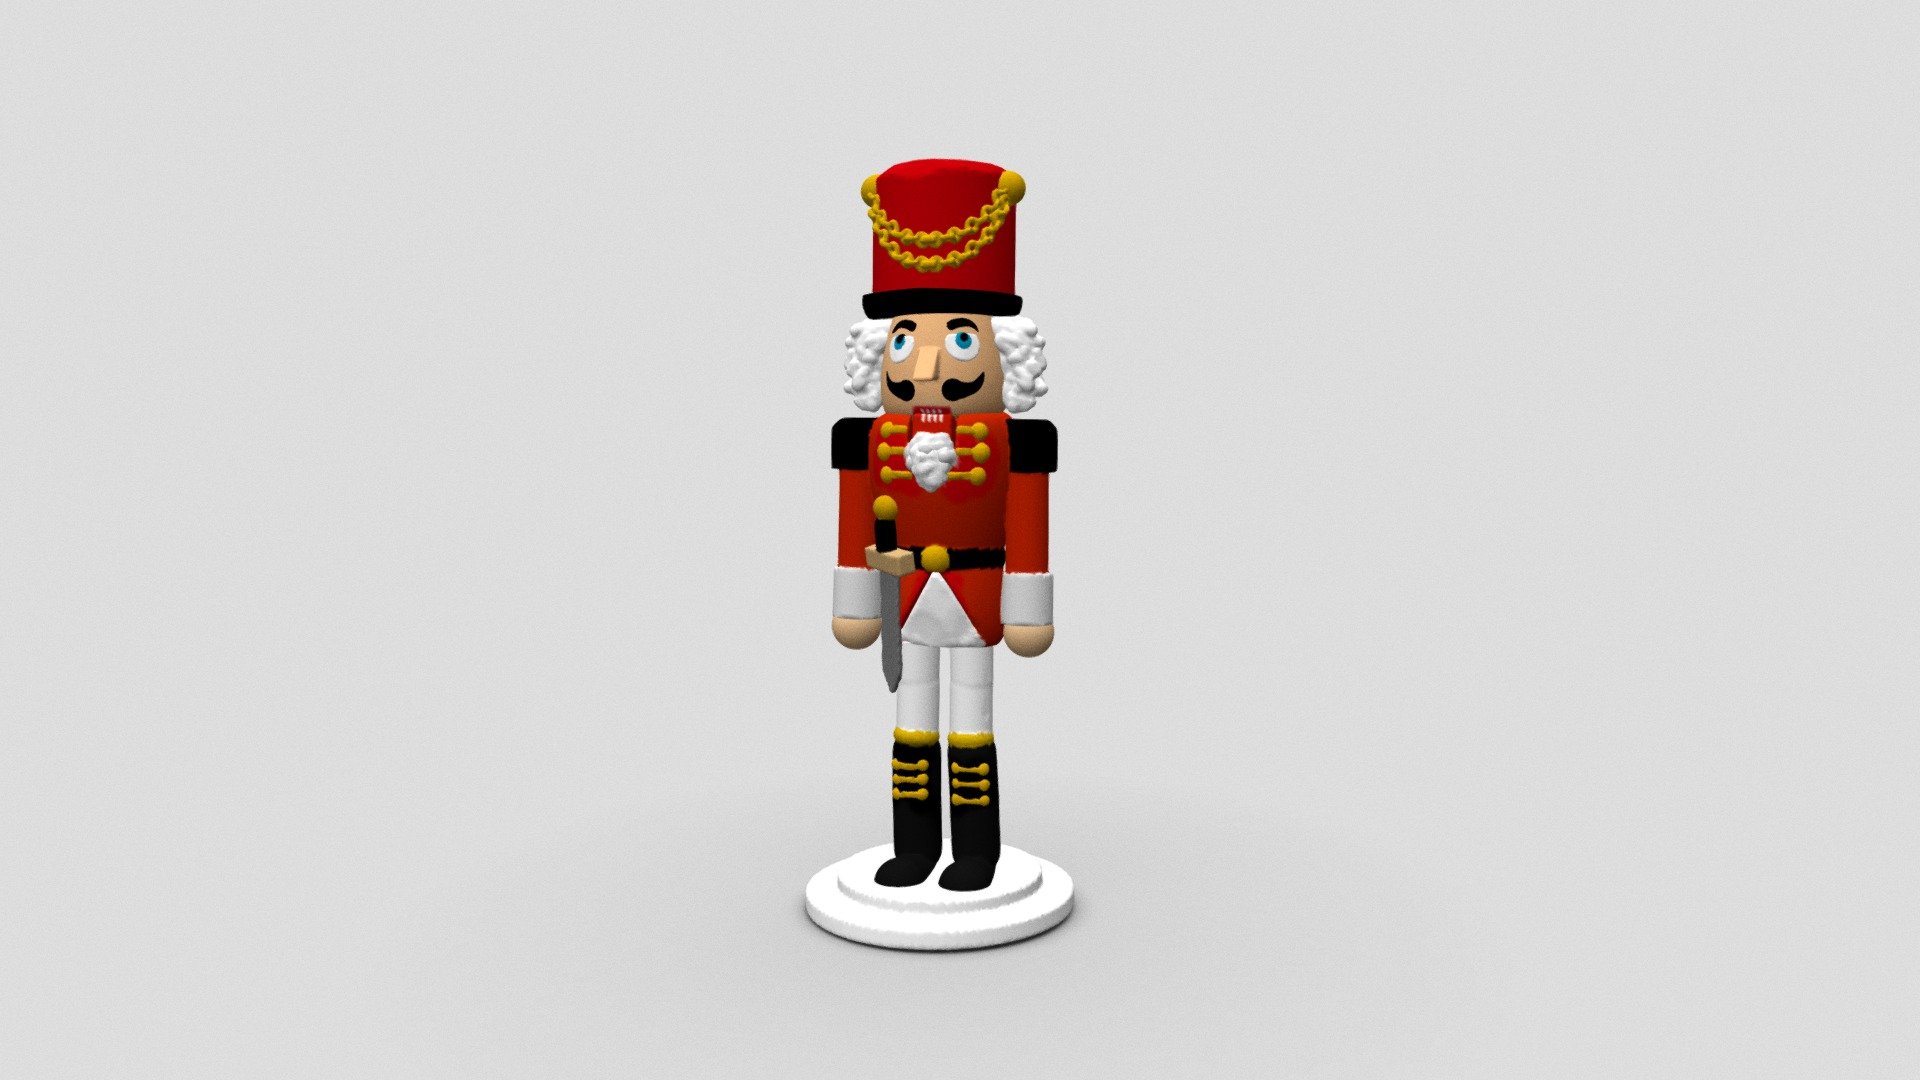 Sculpted in VR with oculus medium. Painting on vertex isn't great so I had to create shapes for everything (typically the moustaches and eyes).

I used an actual nutcracker on my desk as a reference :)



From Wikipedia: Nutcrackers in the form of wood carvings of a soldier, knight, king, or other profession have existed since at least the 15th century. Figurative nutcrackers are a good luck symbol in Germany, and a folk tale recounts that a puppet-maker won a nutcracking challenge by creating a doll with a mouth for a lever to crack the nuts.

The file comes with a printable version for a 6cm high print, here is how it look printed (here it's 15cm high):
 - Medium nutcracker - Buy Royalty Free 3D model by alban 3d model